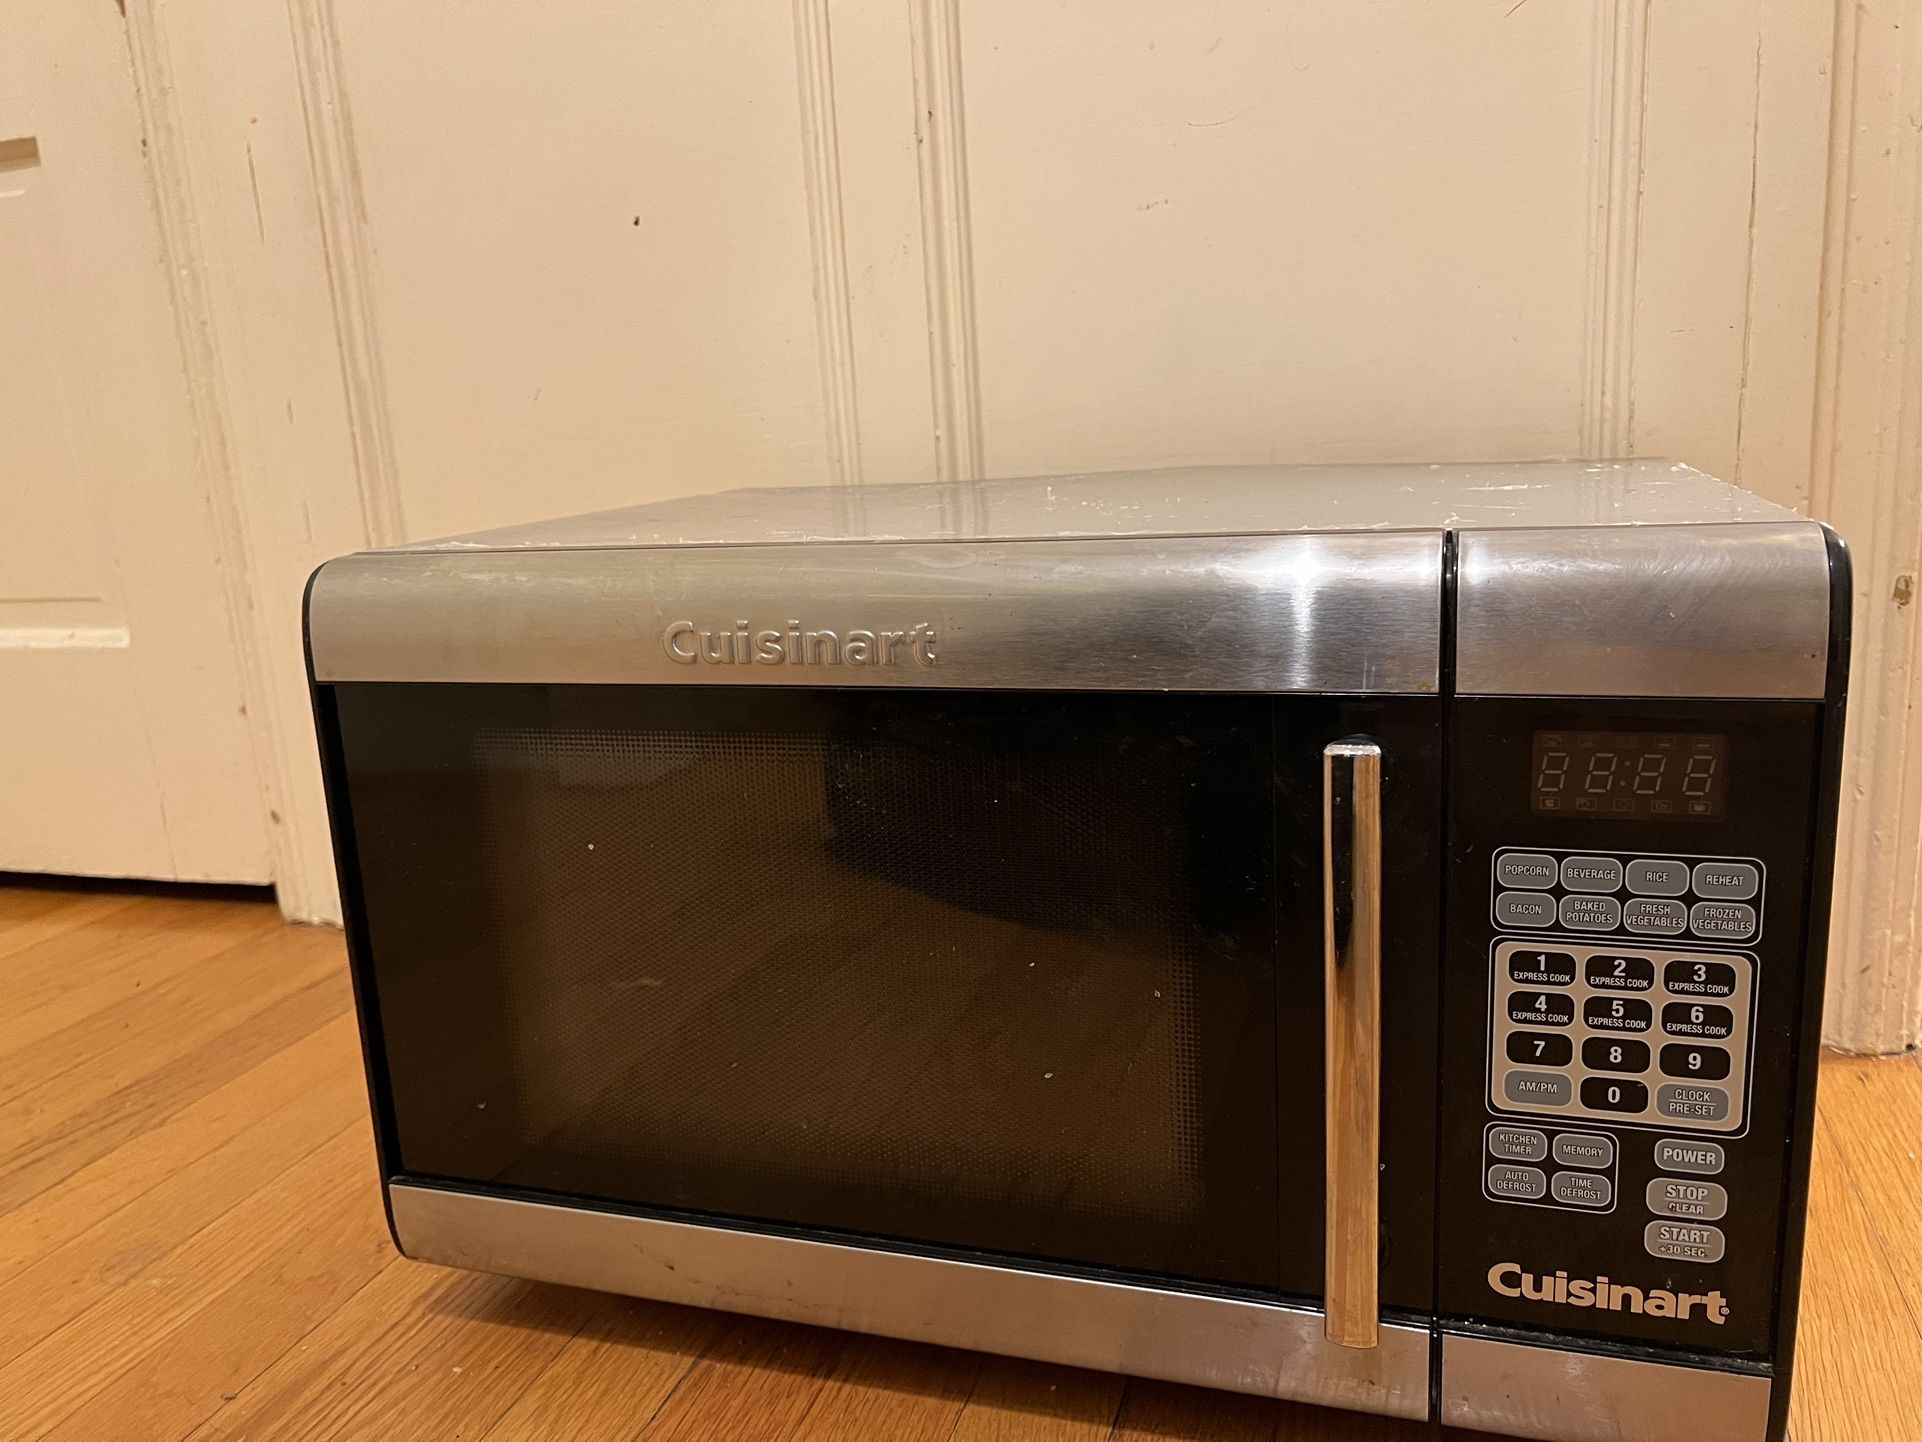 Cuisinart 1 Cu.ft. Stainless Steel Microwave Oven CMW-100